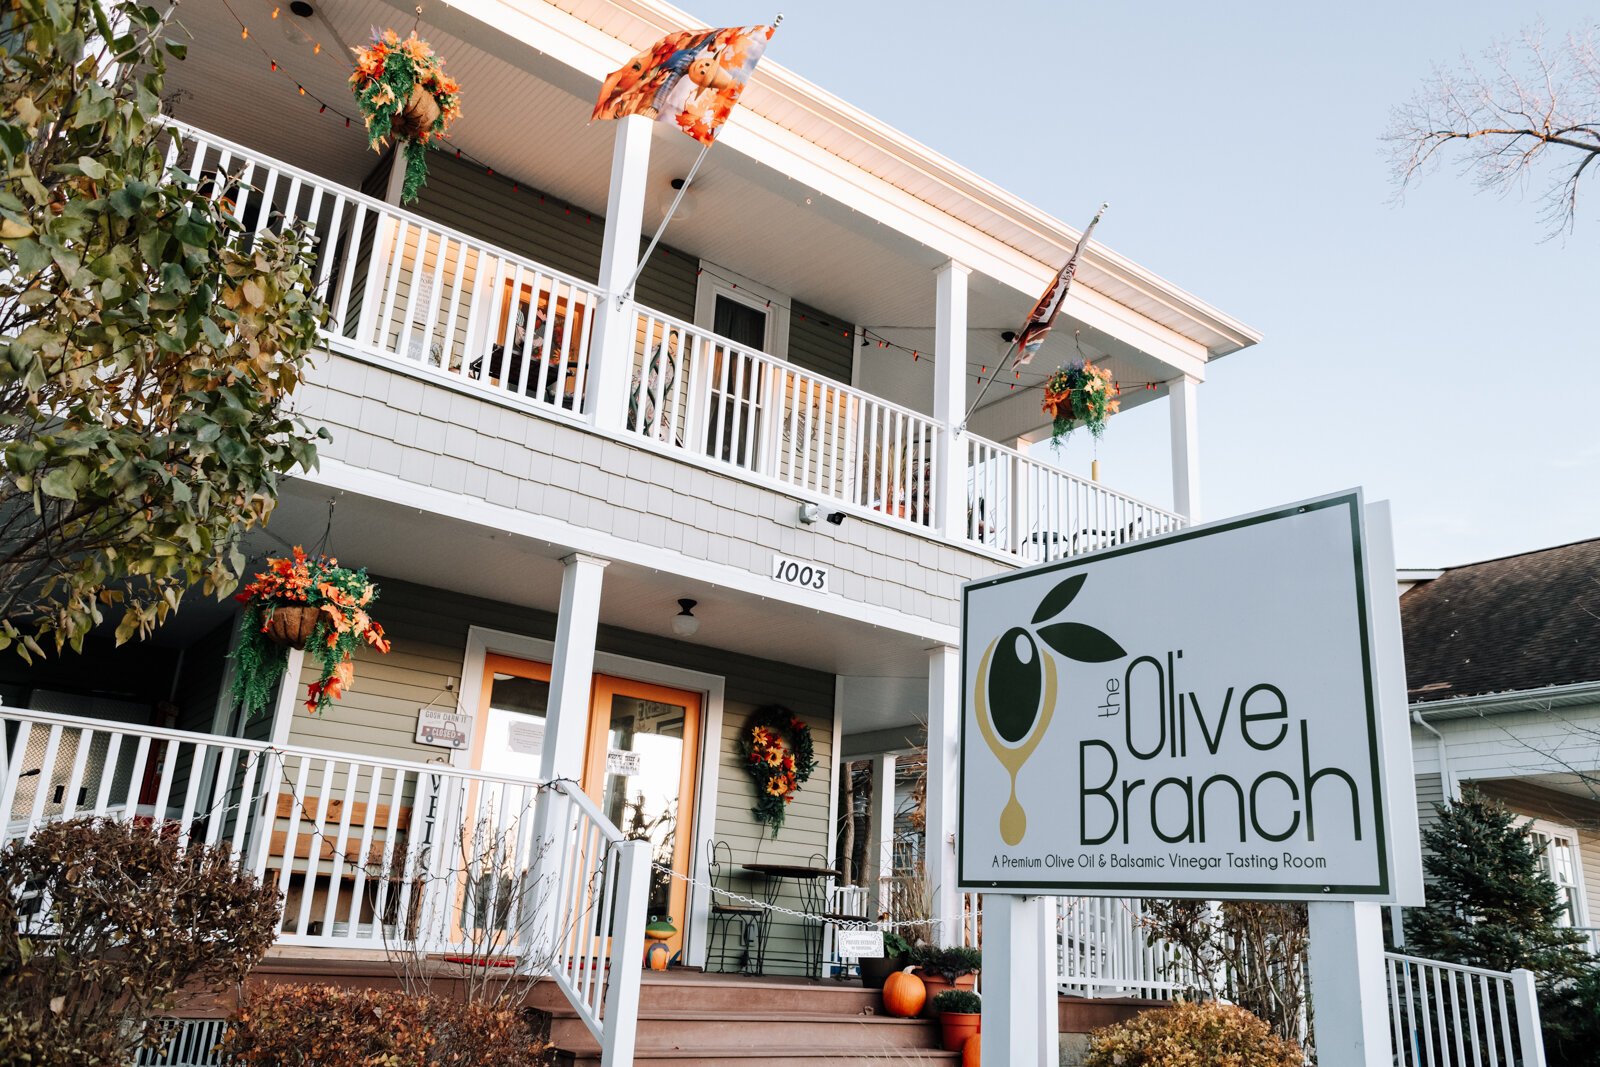 The Olive Branch at 1003 E. Canal St. in the Village at Winona Lake.